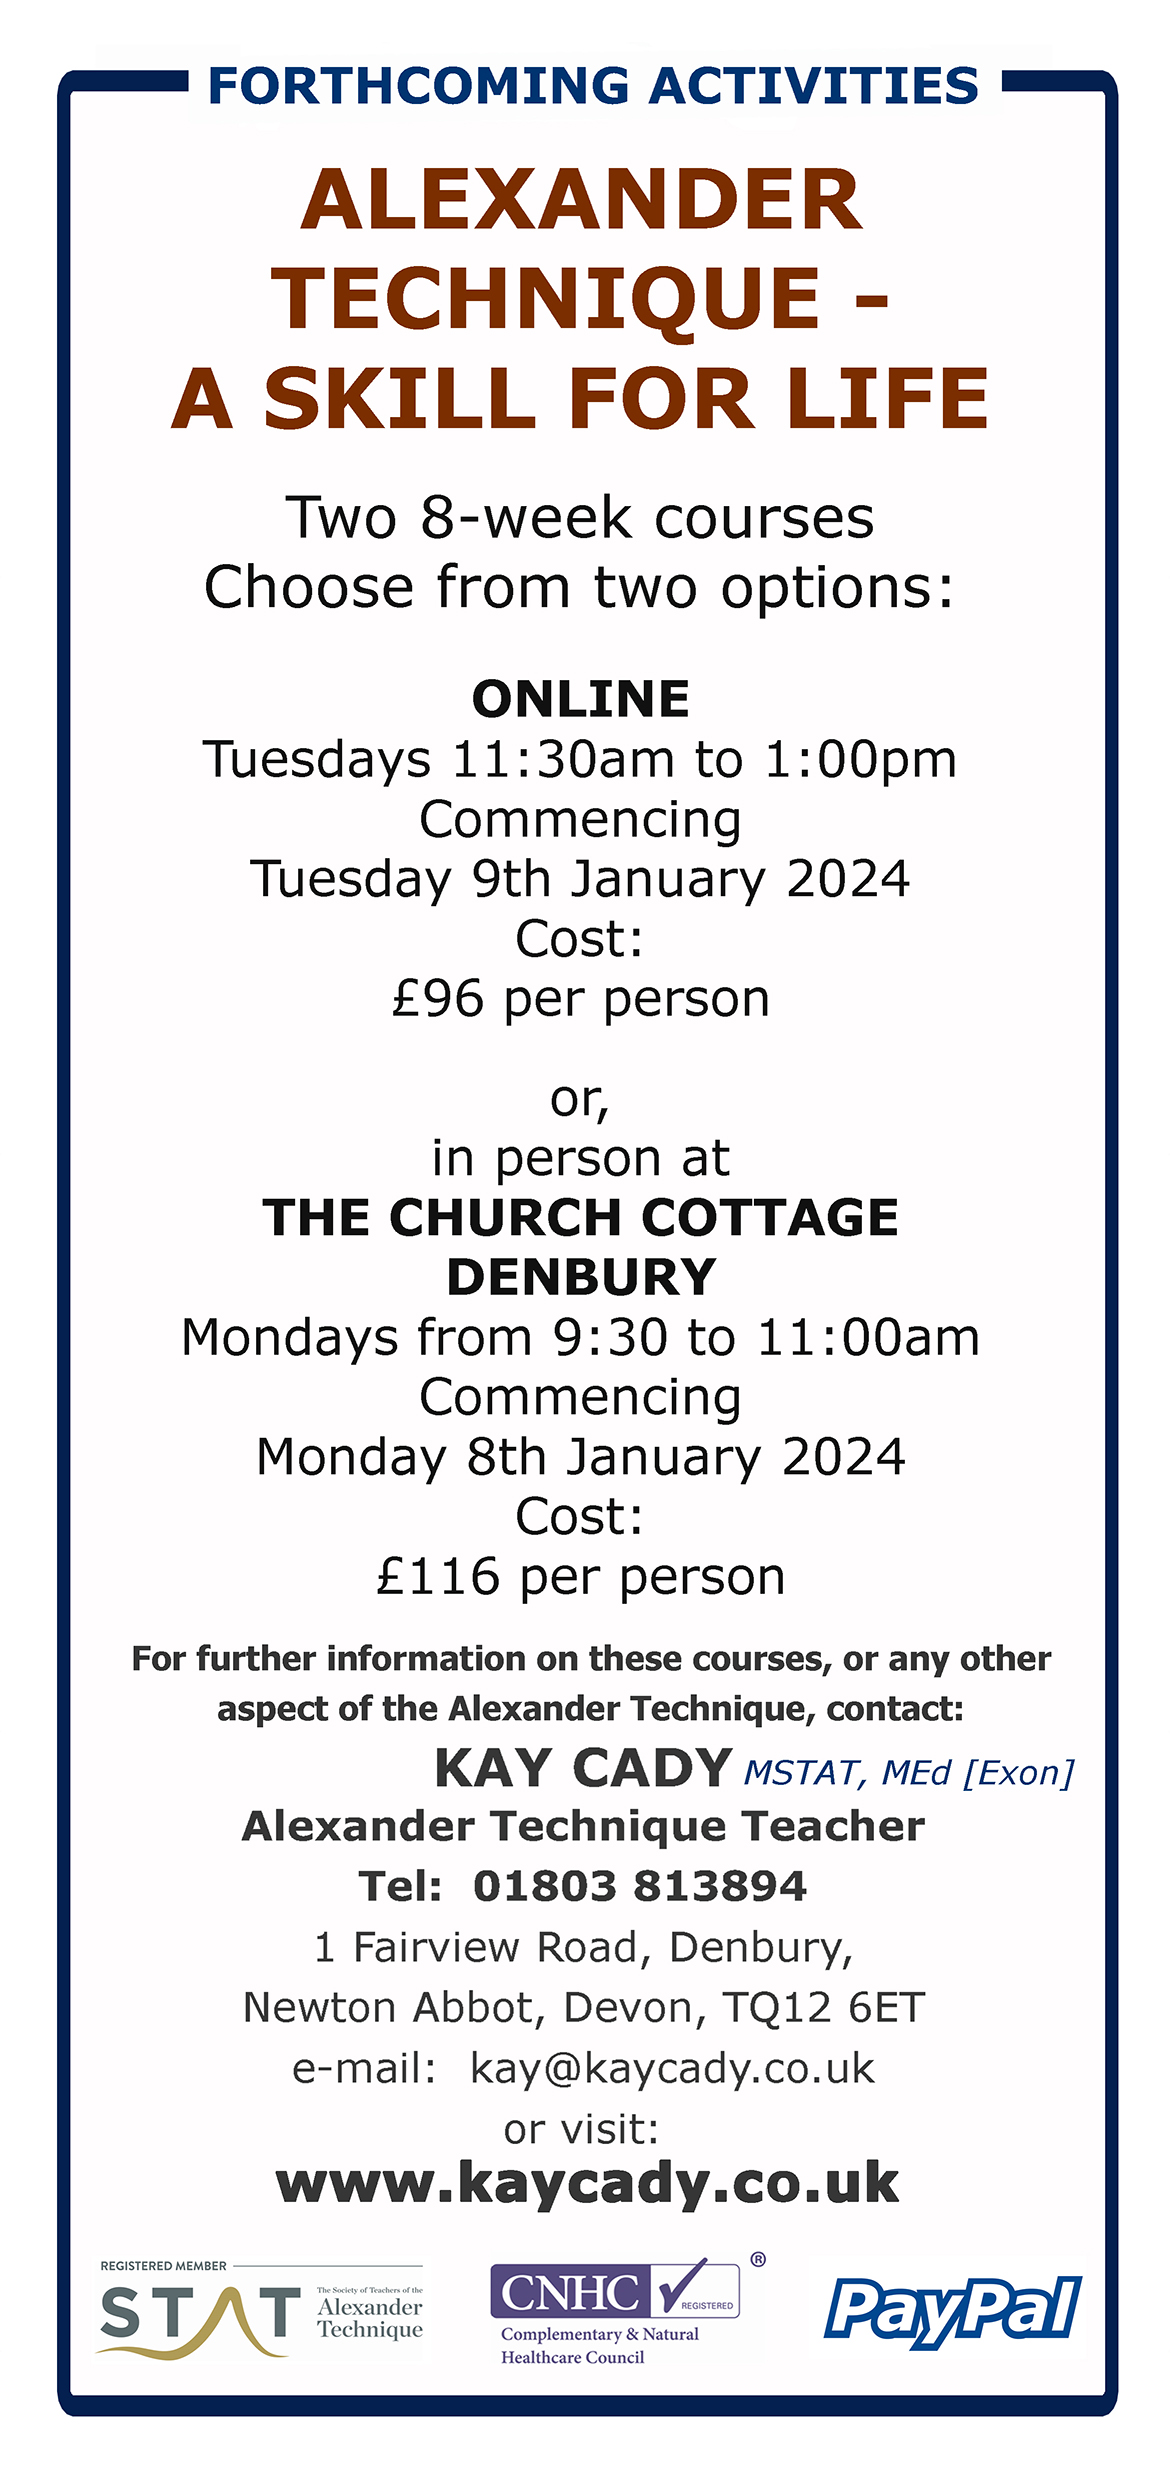 Details of my online and local courses January 2024 